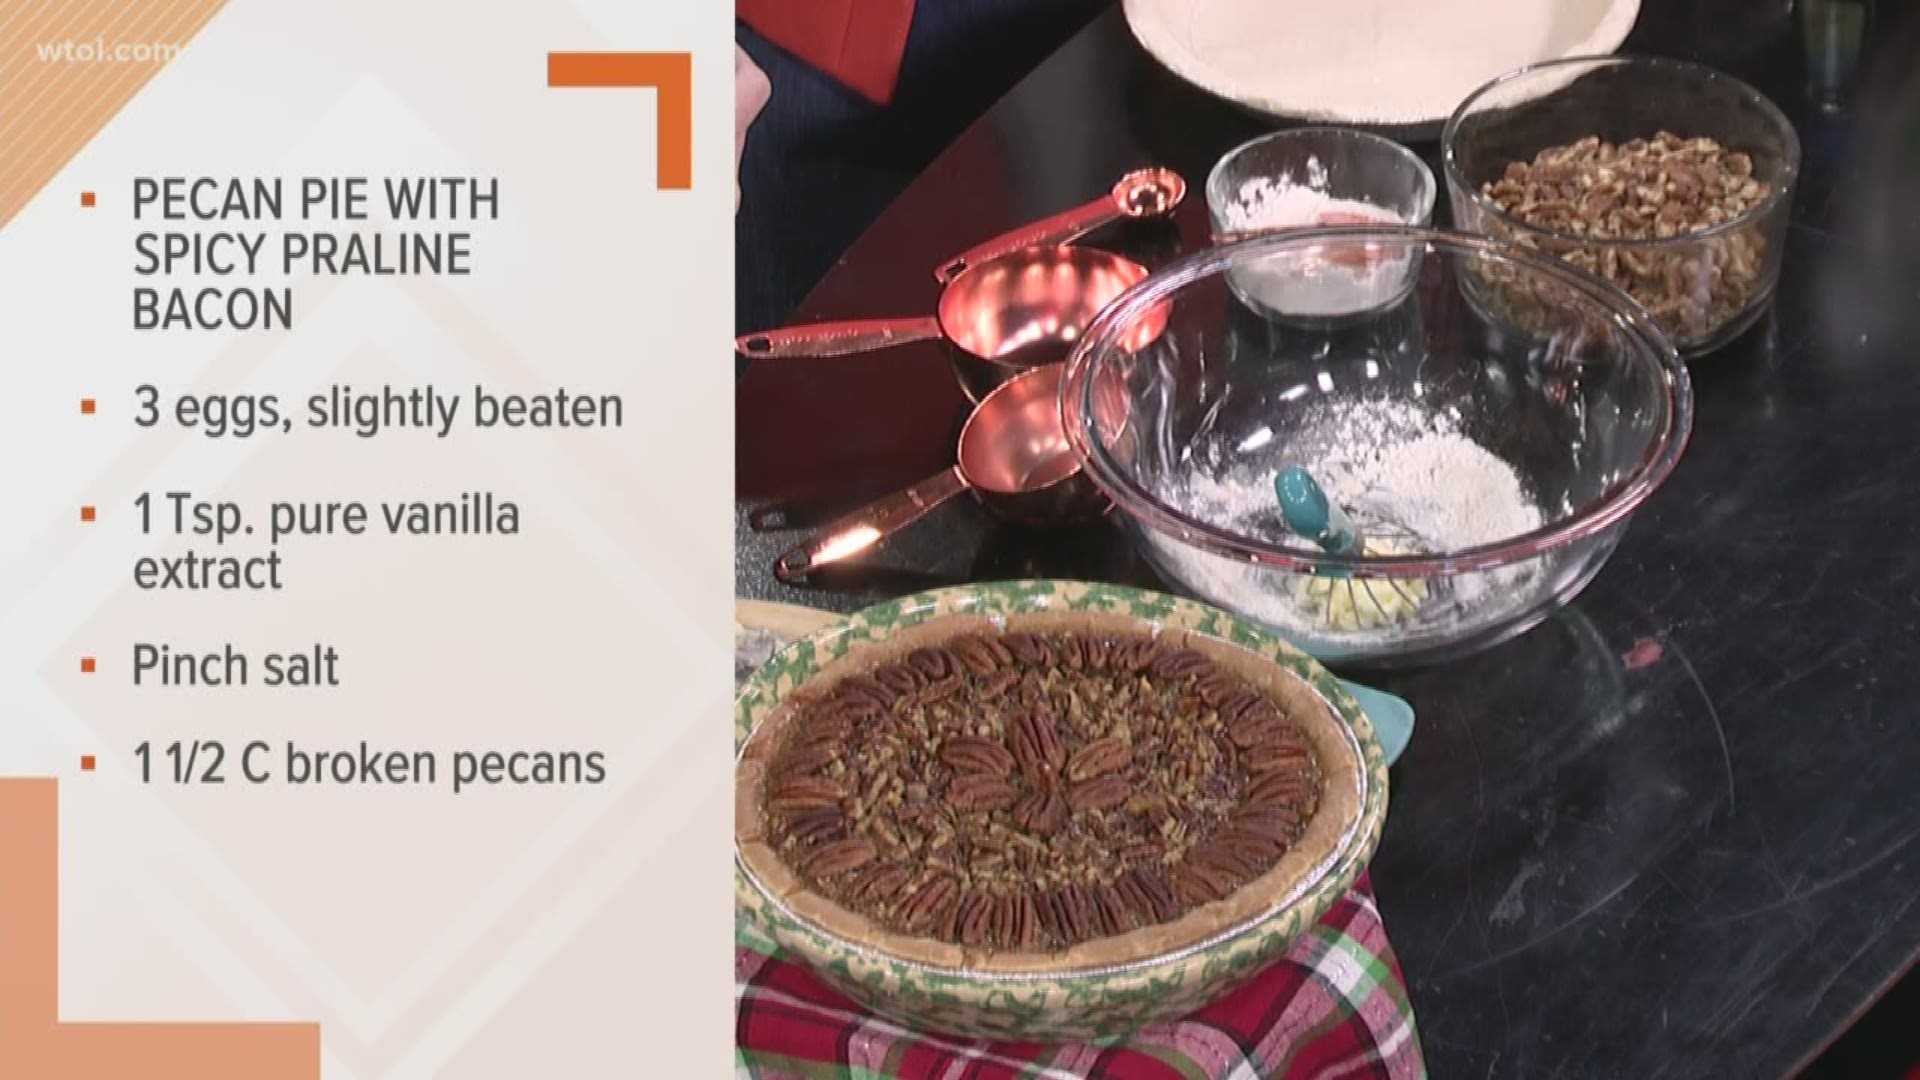 The Legal Duchess has a pecan pie recipe that will blow your holiday guests out of the water with a special ingredient: bacon!